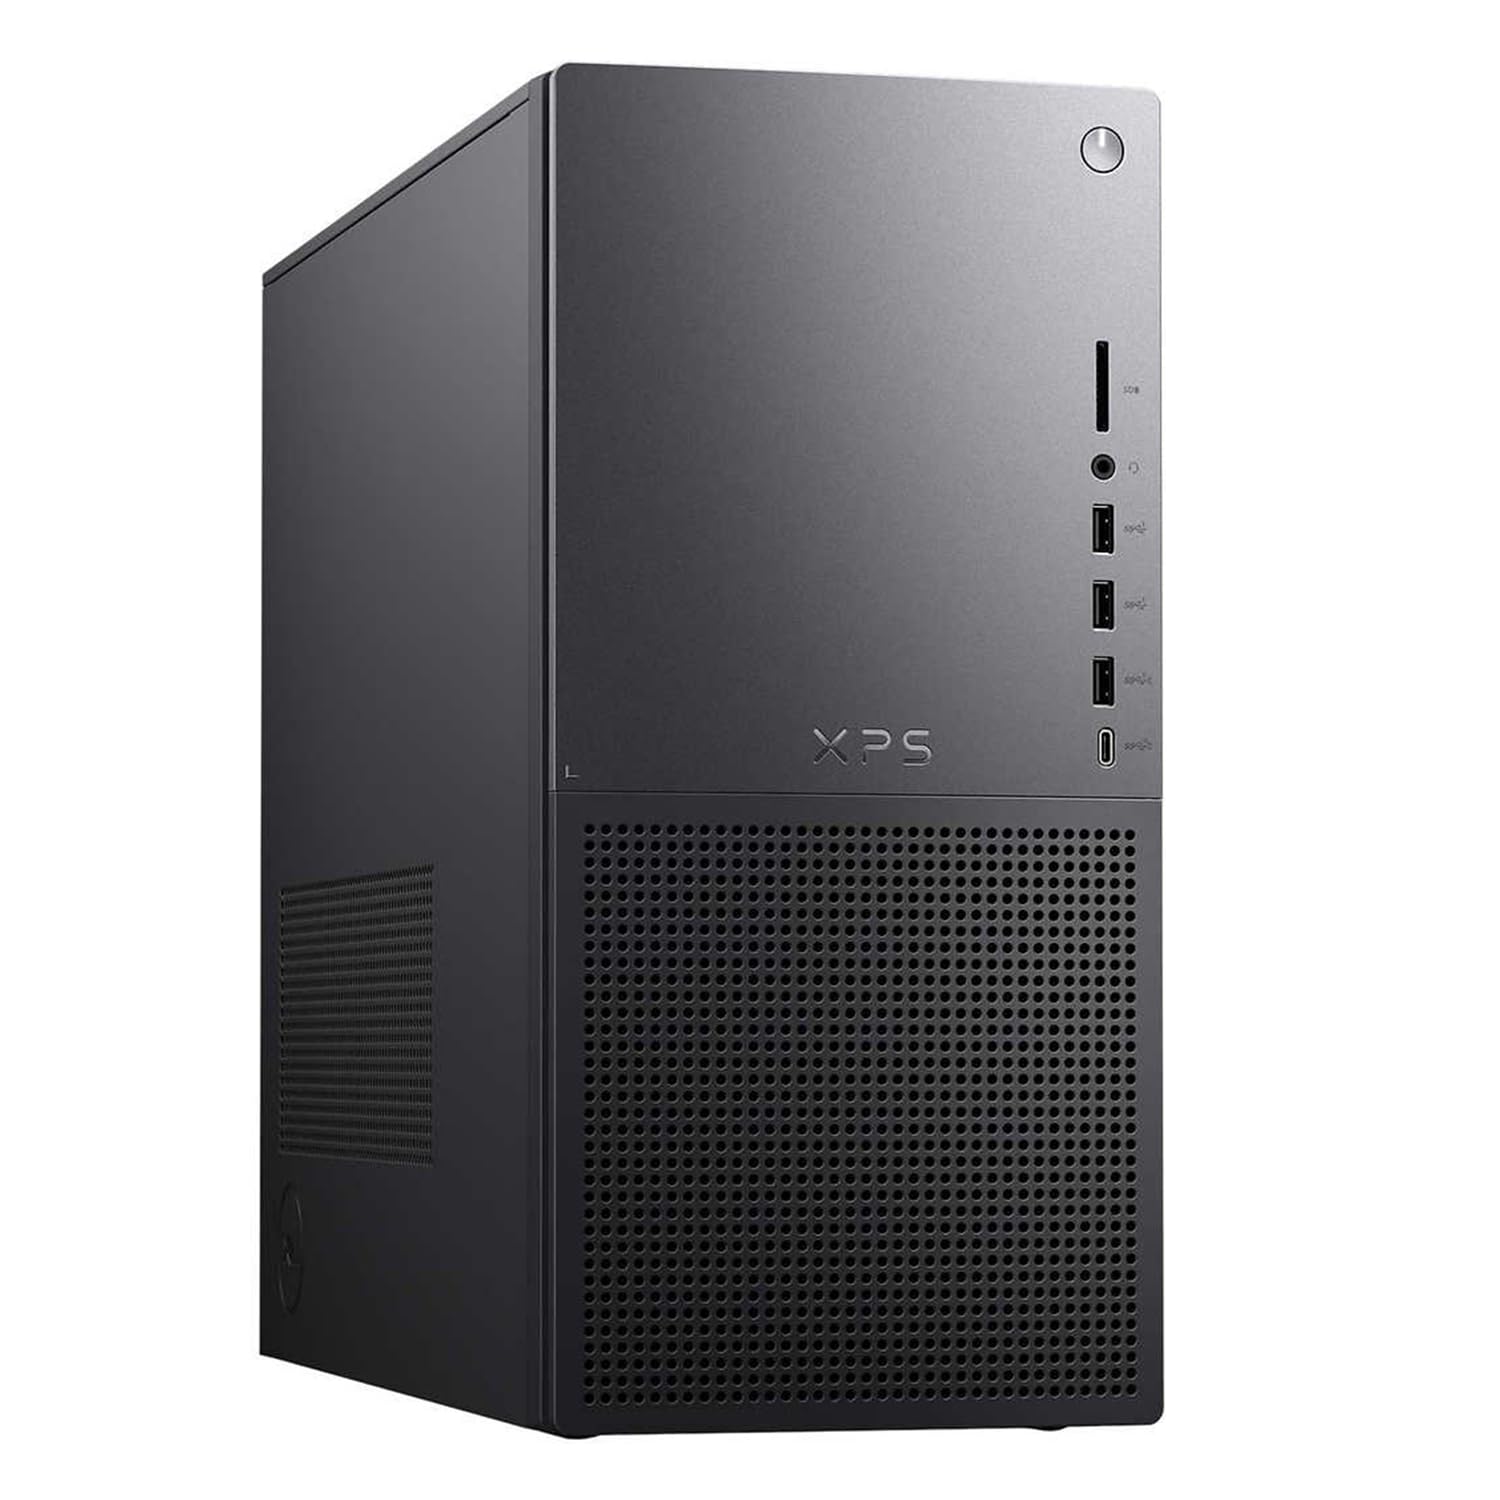 Dell Newest XPS 8960 Tower Desktop Computer, Intel Core i7-13700, 64GB DDR5 RAM, 2TB SSD + 2TB HDD, DisplayPort, Killer Wi-Fi 6, Wired Keyboard&Mouse, Windows 11 Home